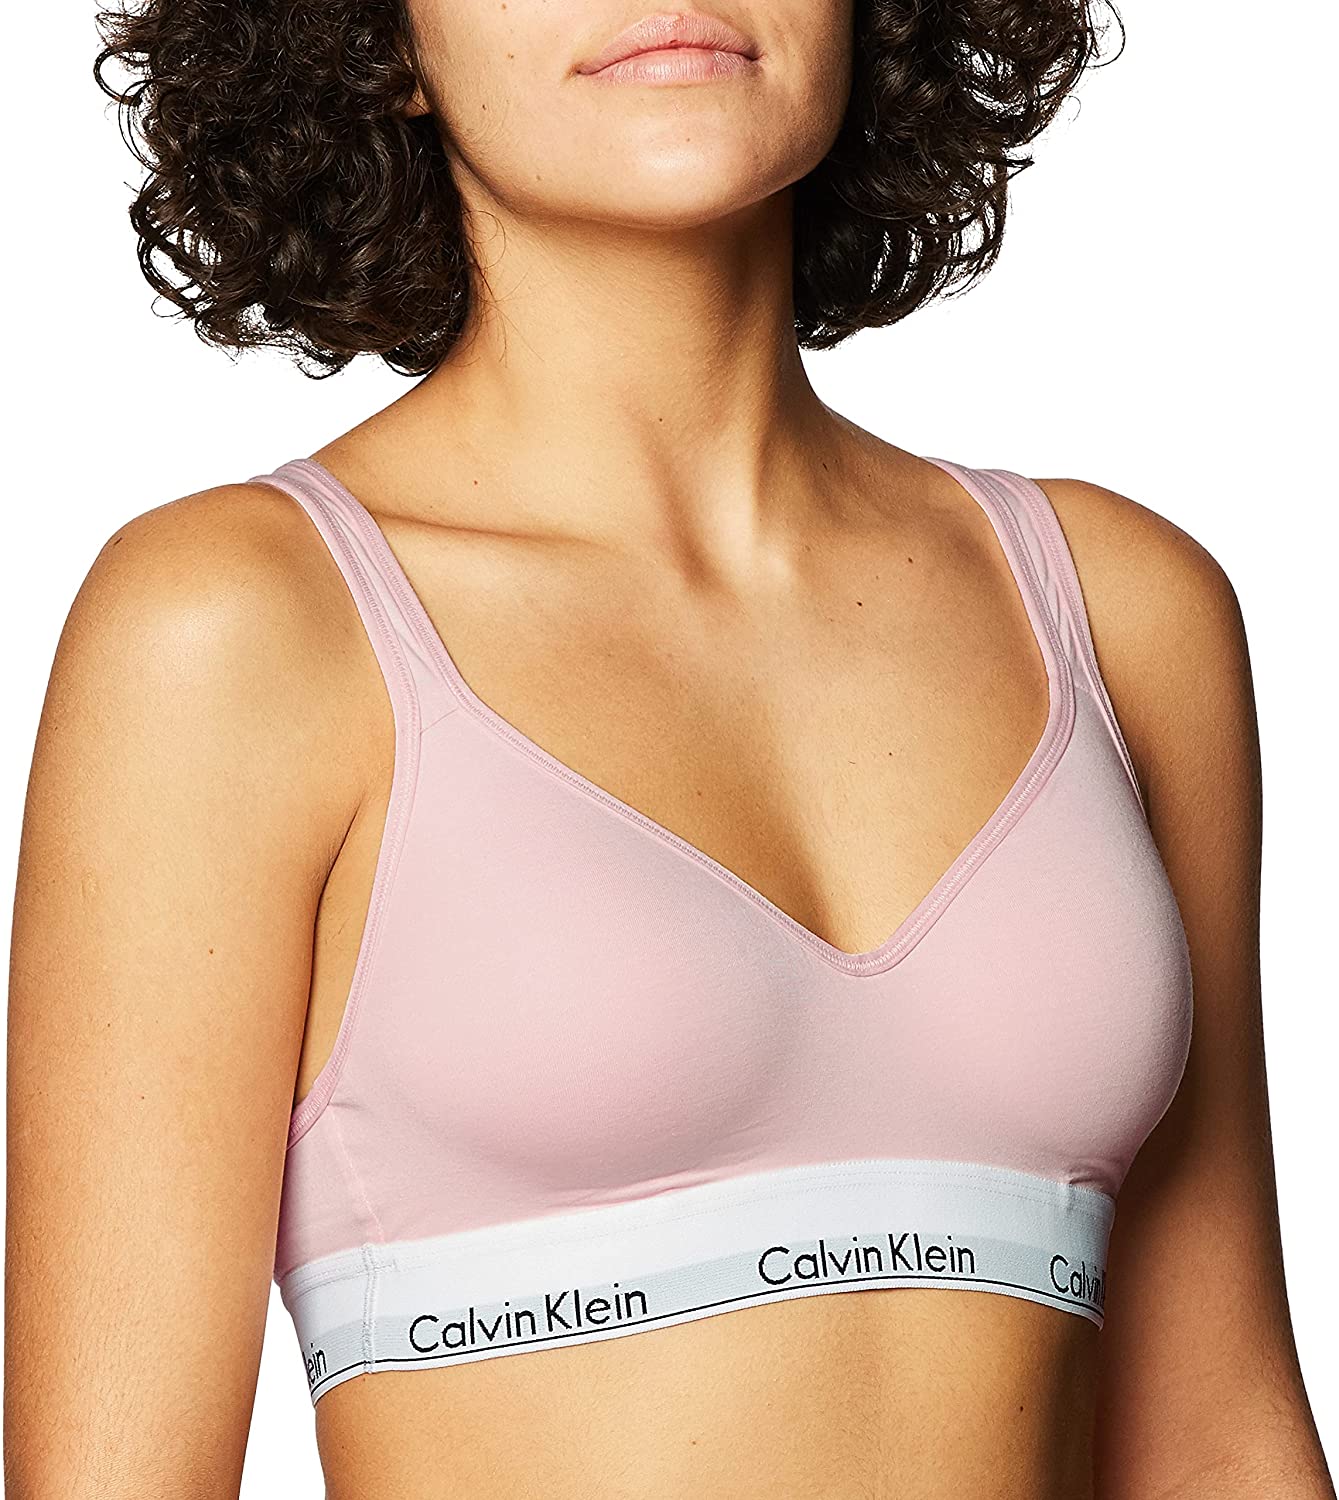 Best Cotton Padded Bra for a Small Chest 8 Best Padded Bras for a Small Chest - Bust-Boosters & Natural Shapes!